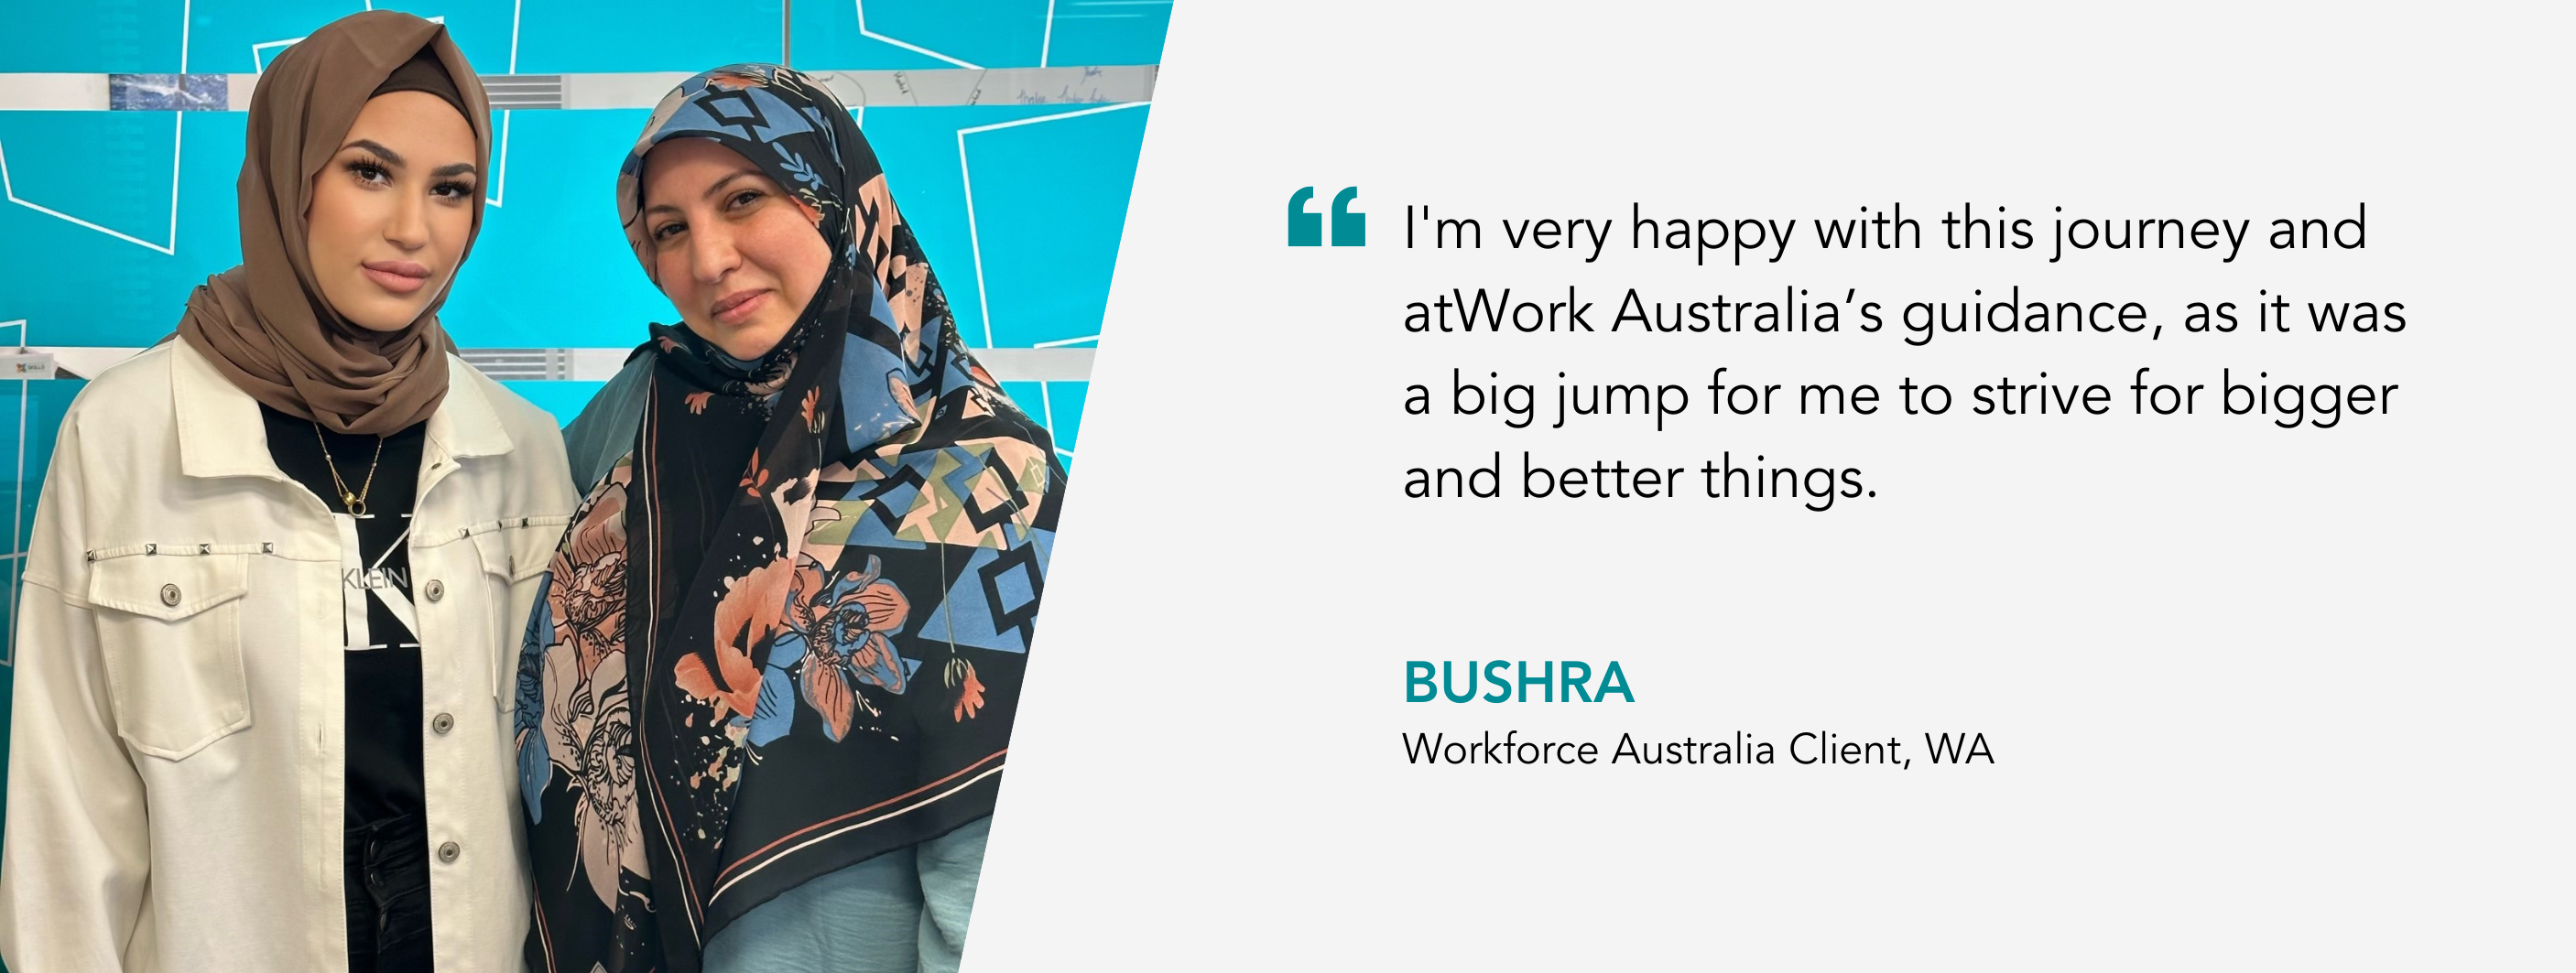 I'm very happy with this journey and atWork Australia’s guidance, as it was a big jump for me to strive for bigger and better things. Bushra, Workforce Australia Client, WA.